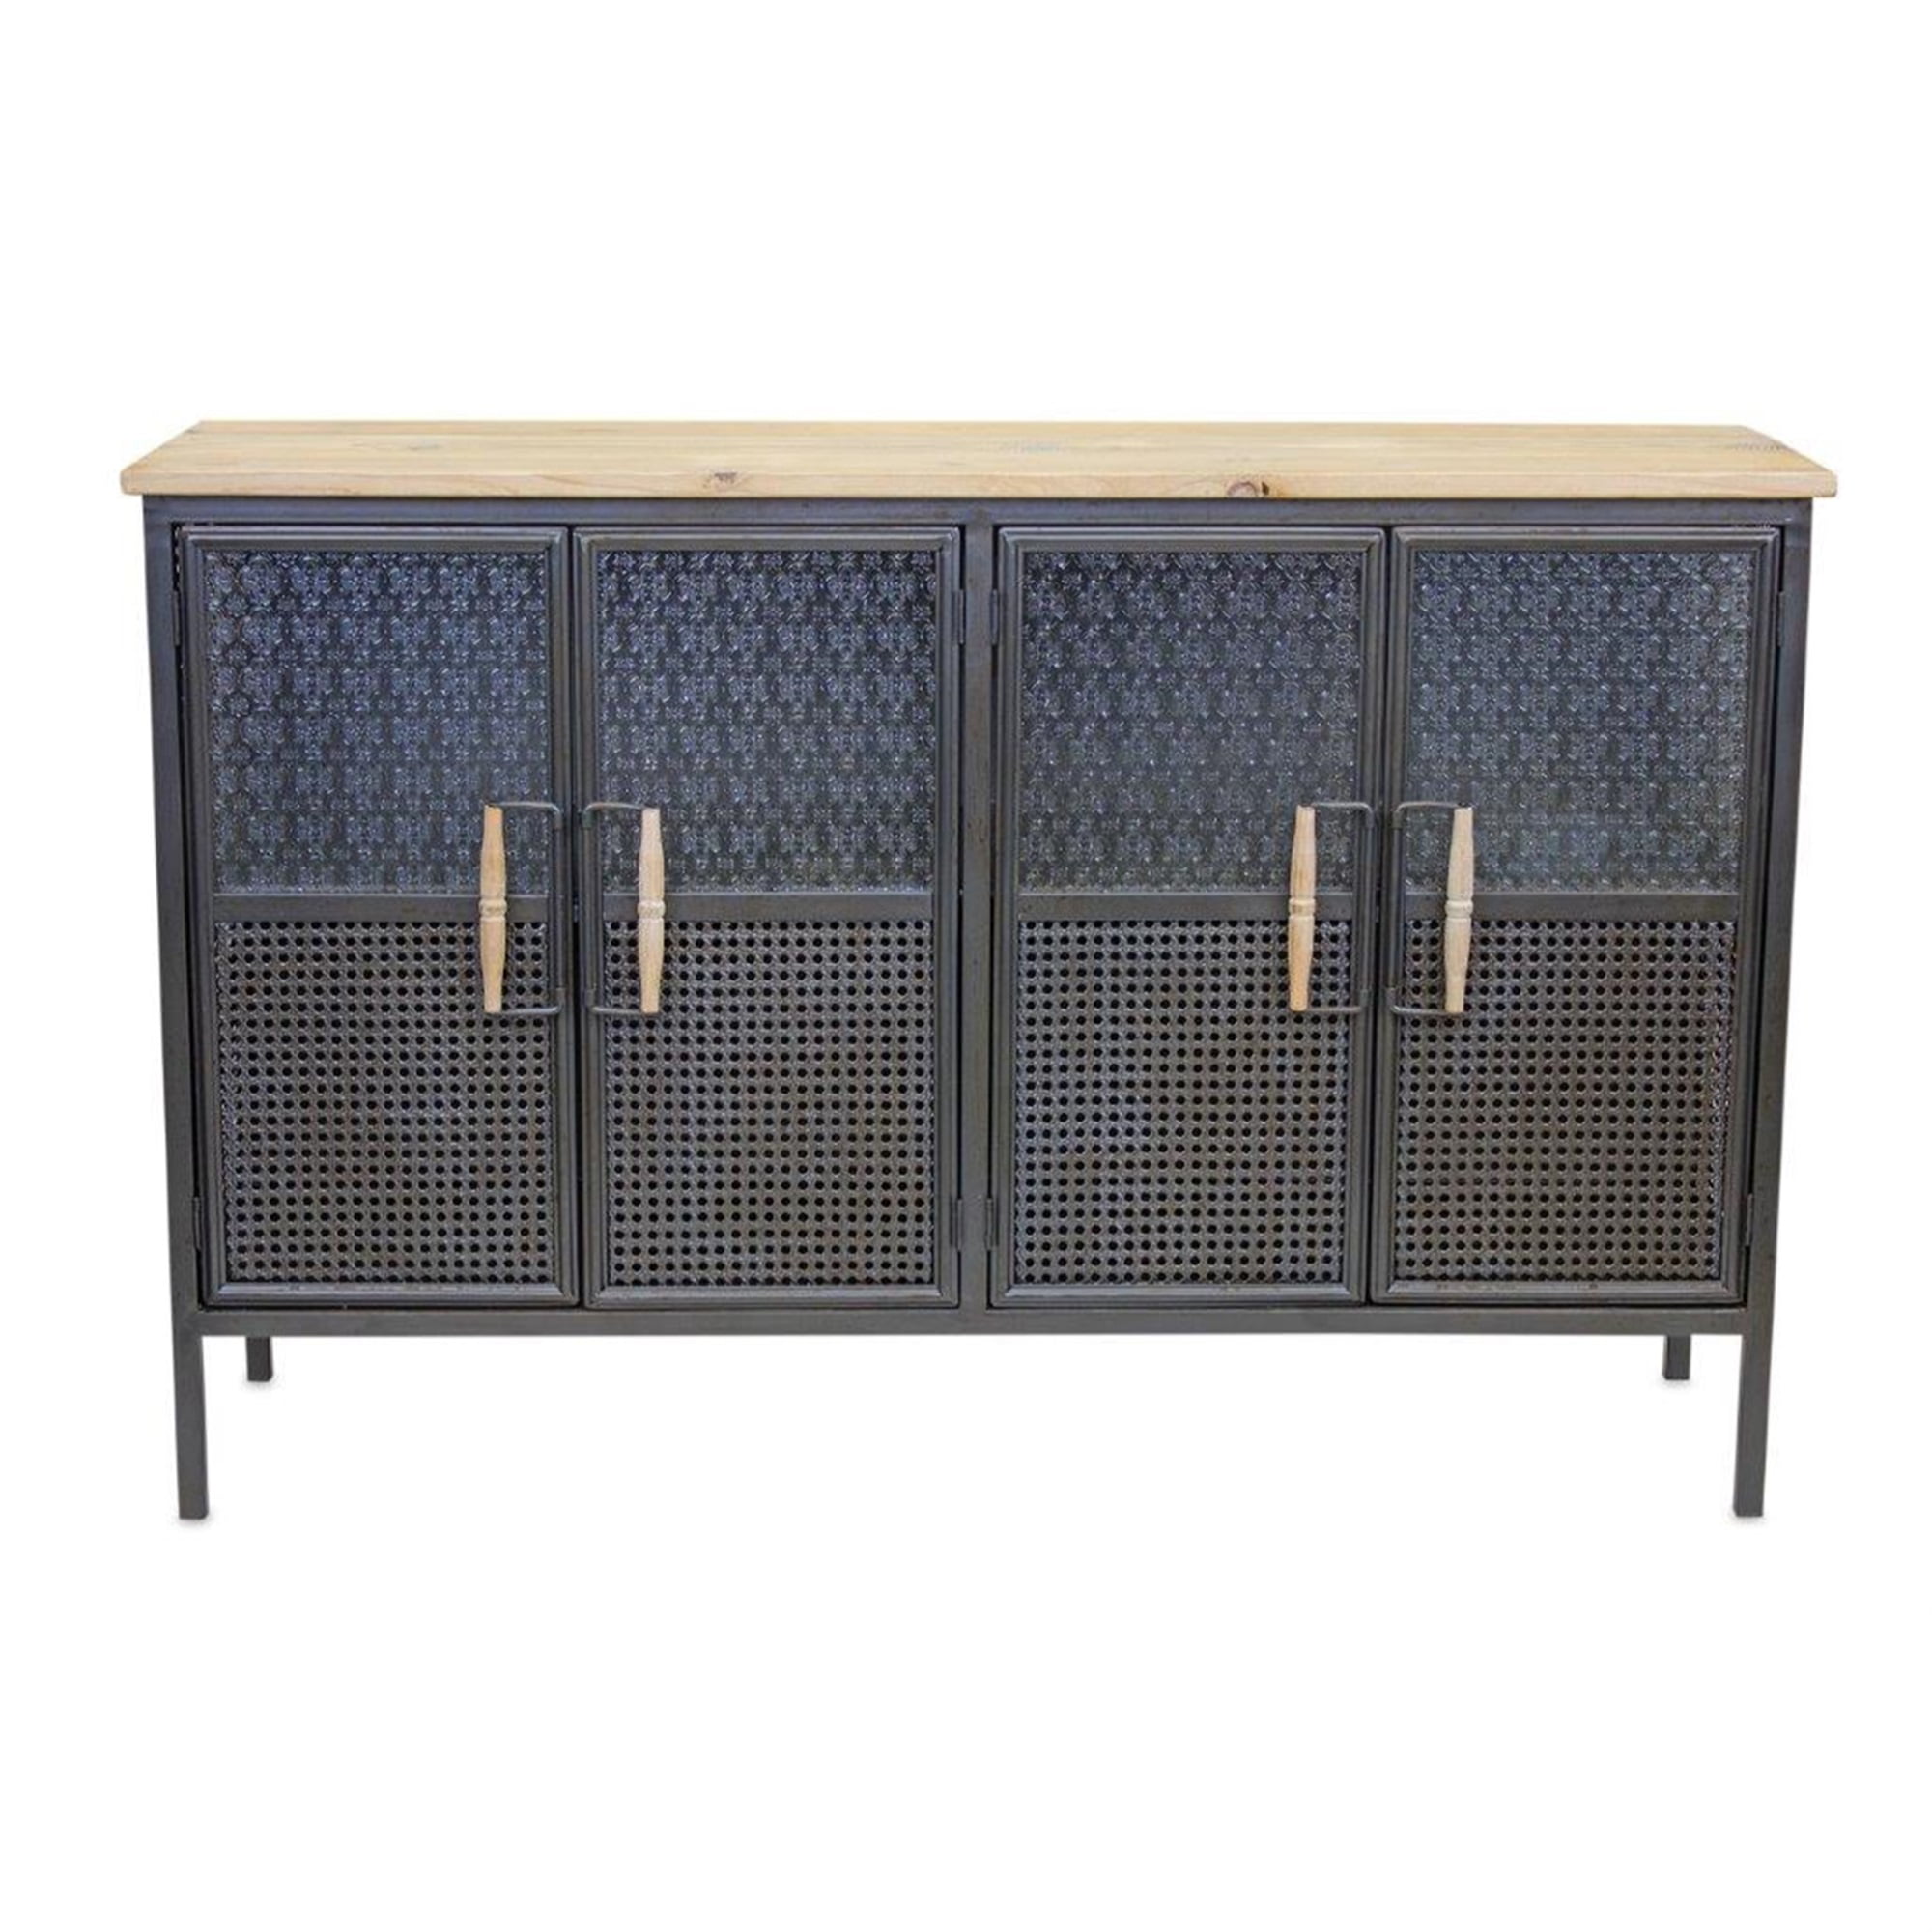 Double Cabinet 47.75"L x 14.5"W x 30.75"H Metal/Wood/Glass